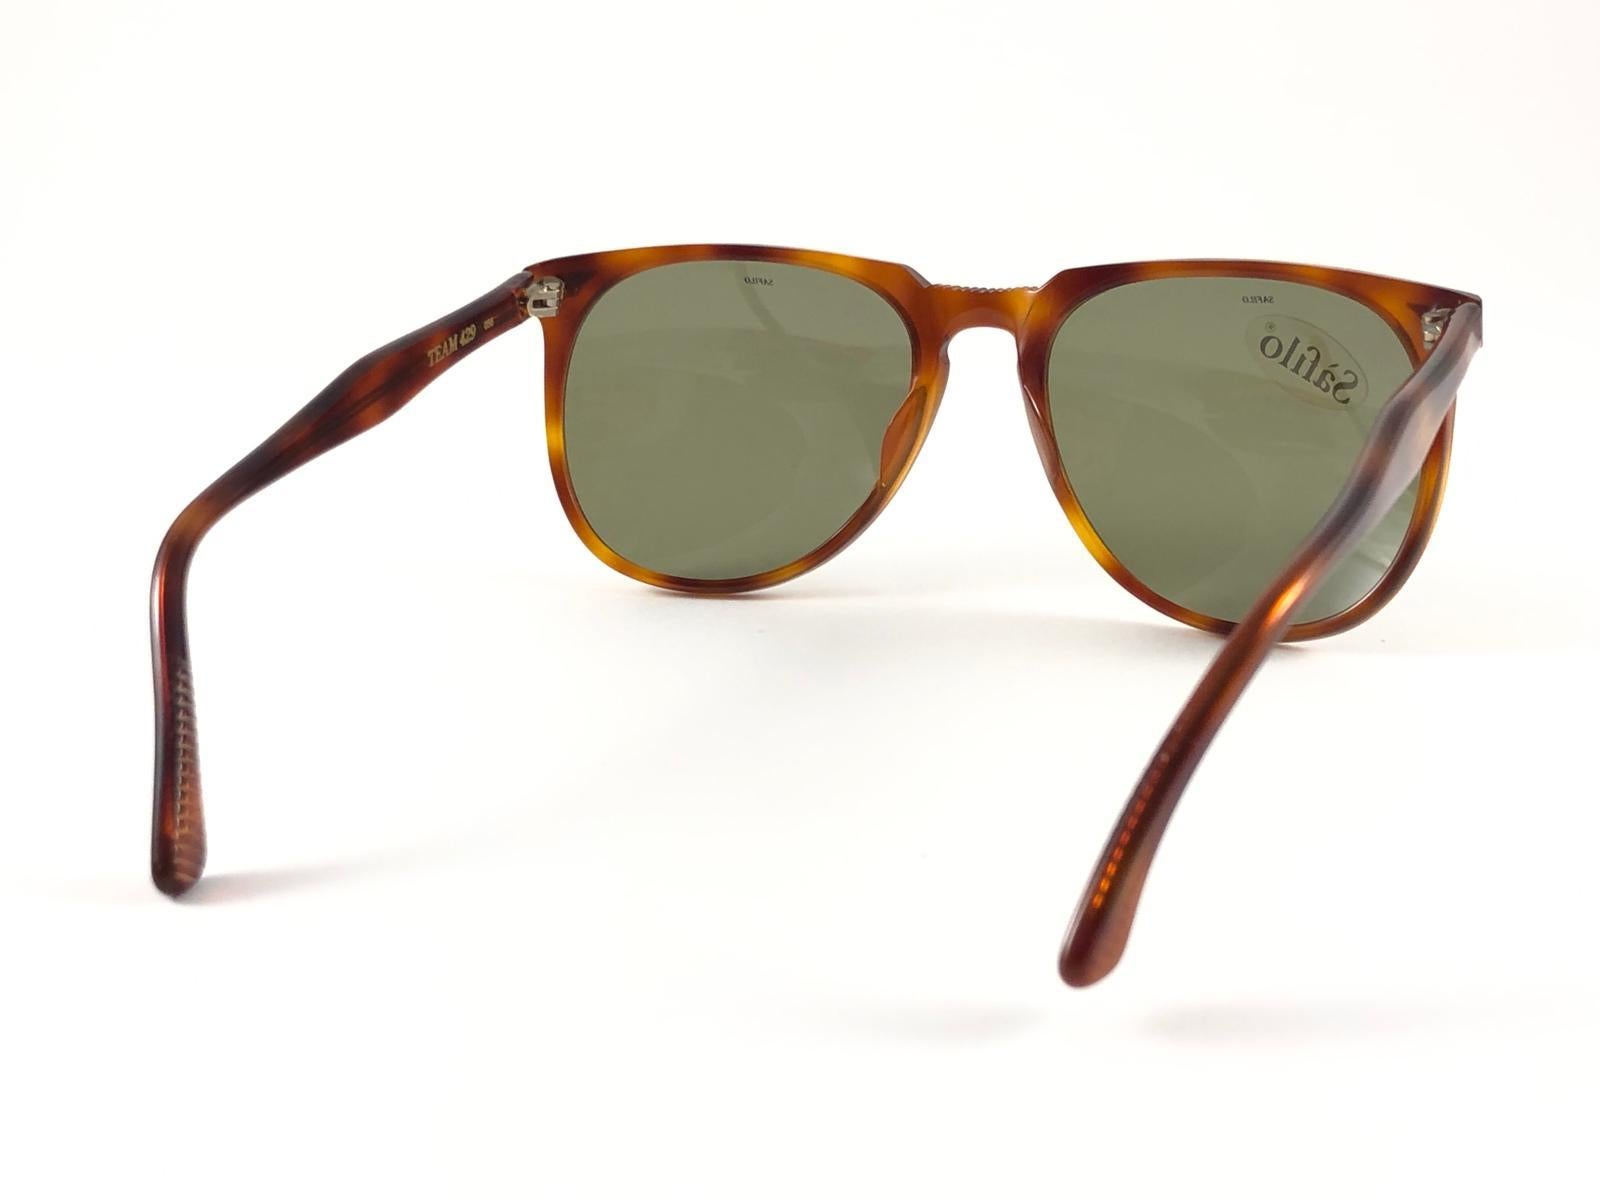 New Vintage Safilo Team 429 Tortoise Frame Made in Italy 1980's Sunglasses For Sale 3